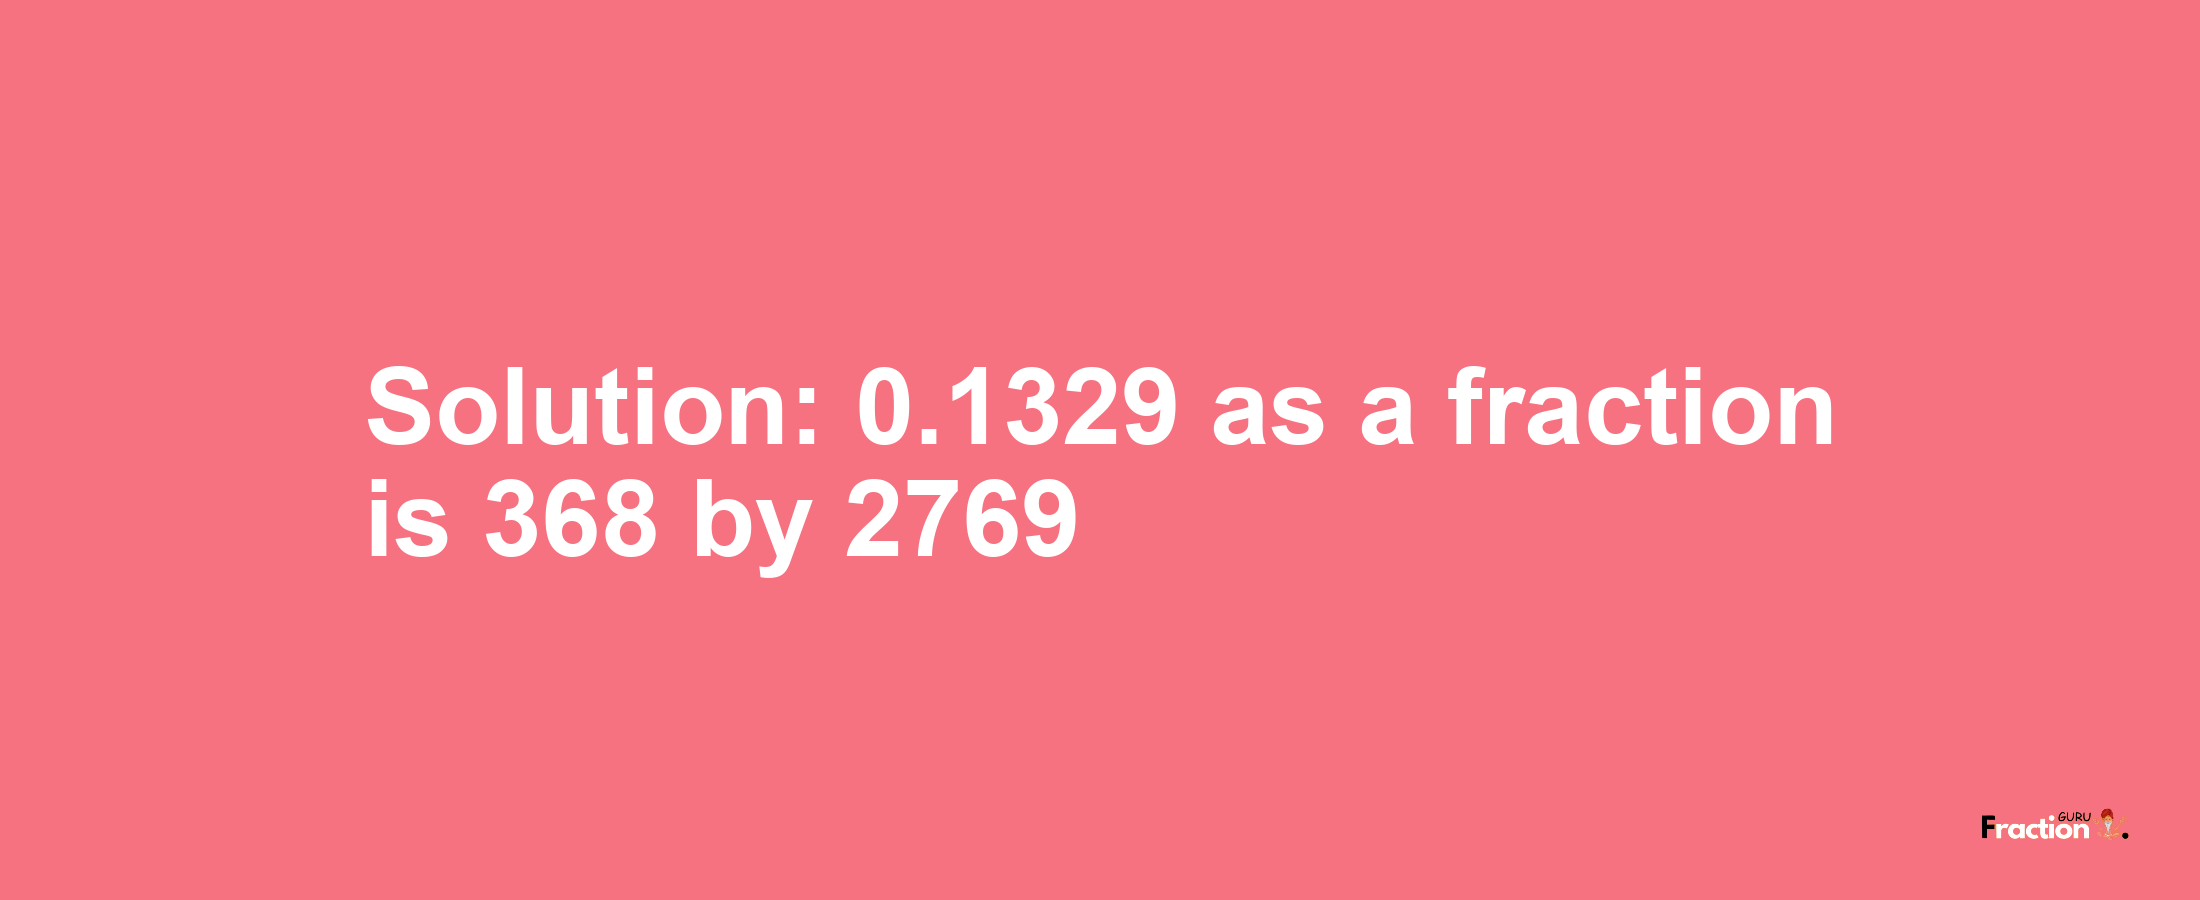 Solution:0.1329 as a fraction is 368/2769